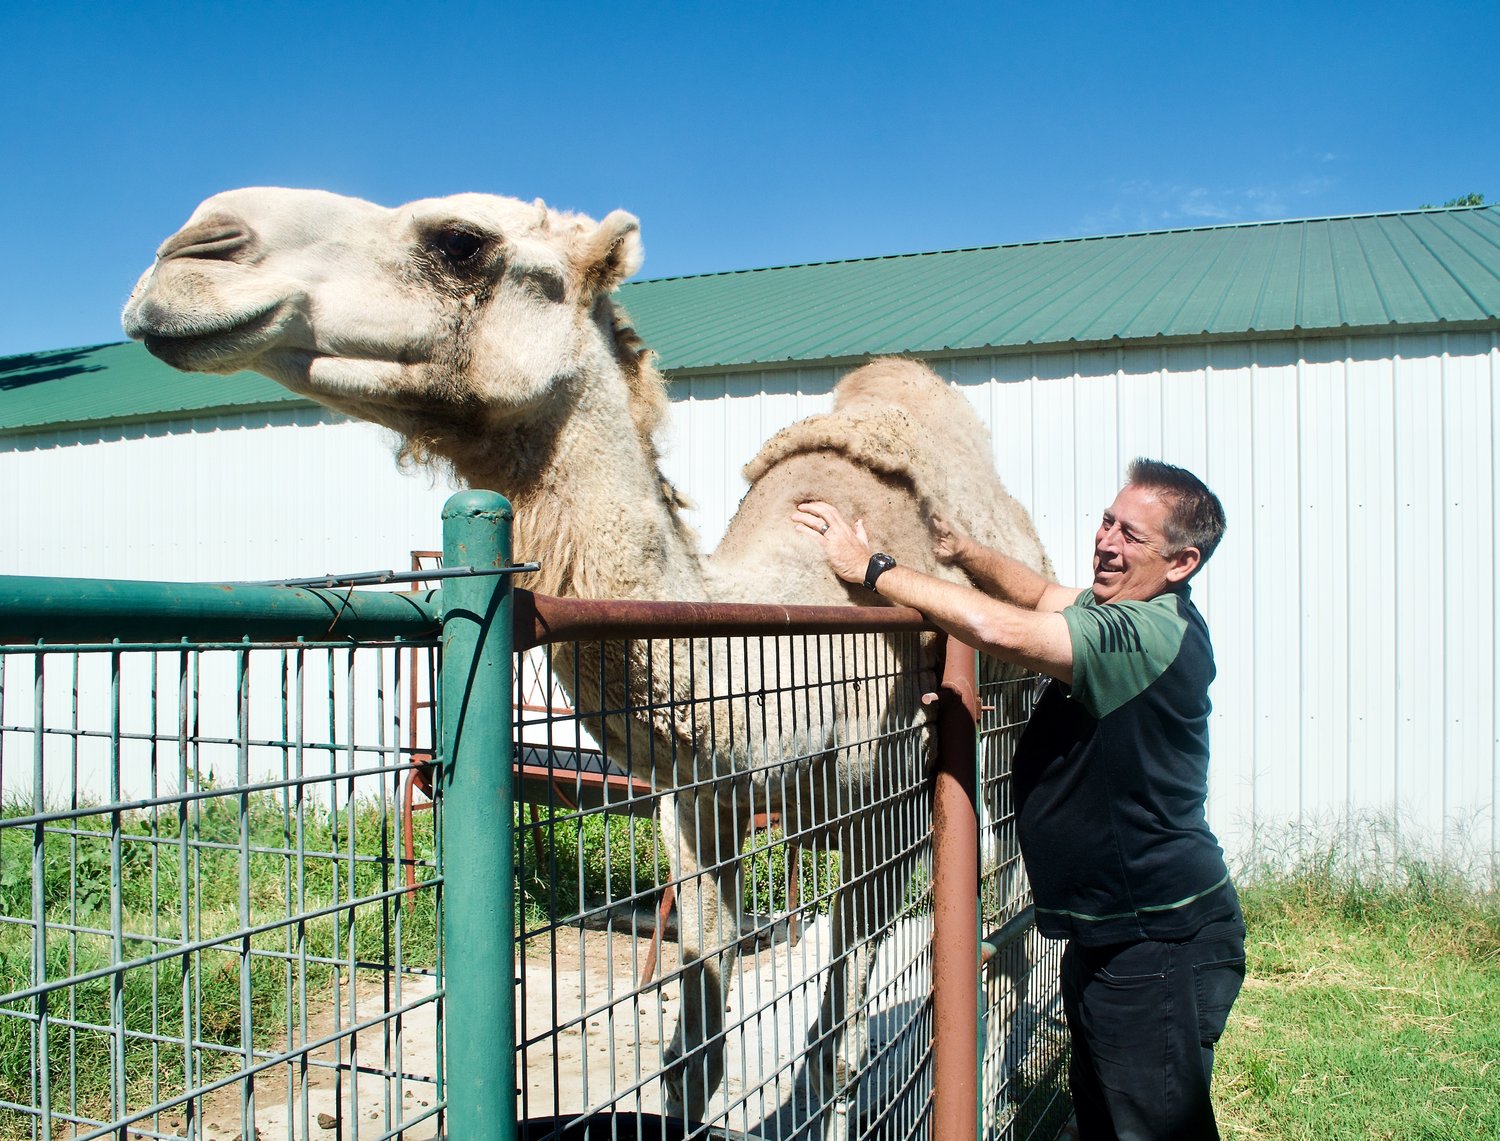 Bryan Clemensen stops a tour of the group home to pet Sally, the ranch's beloved camel, on Wednesday.